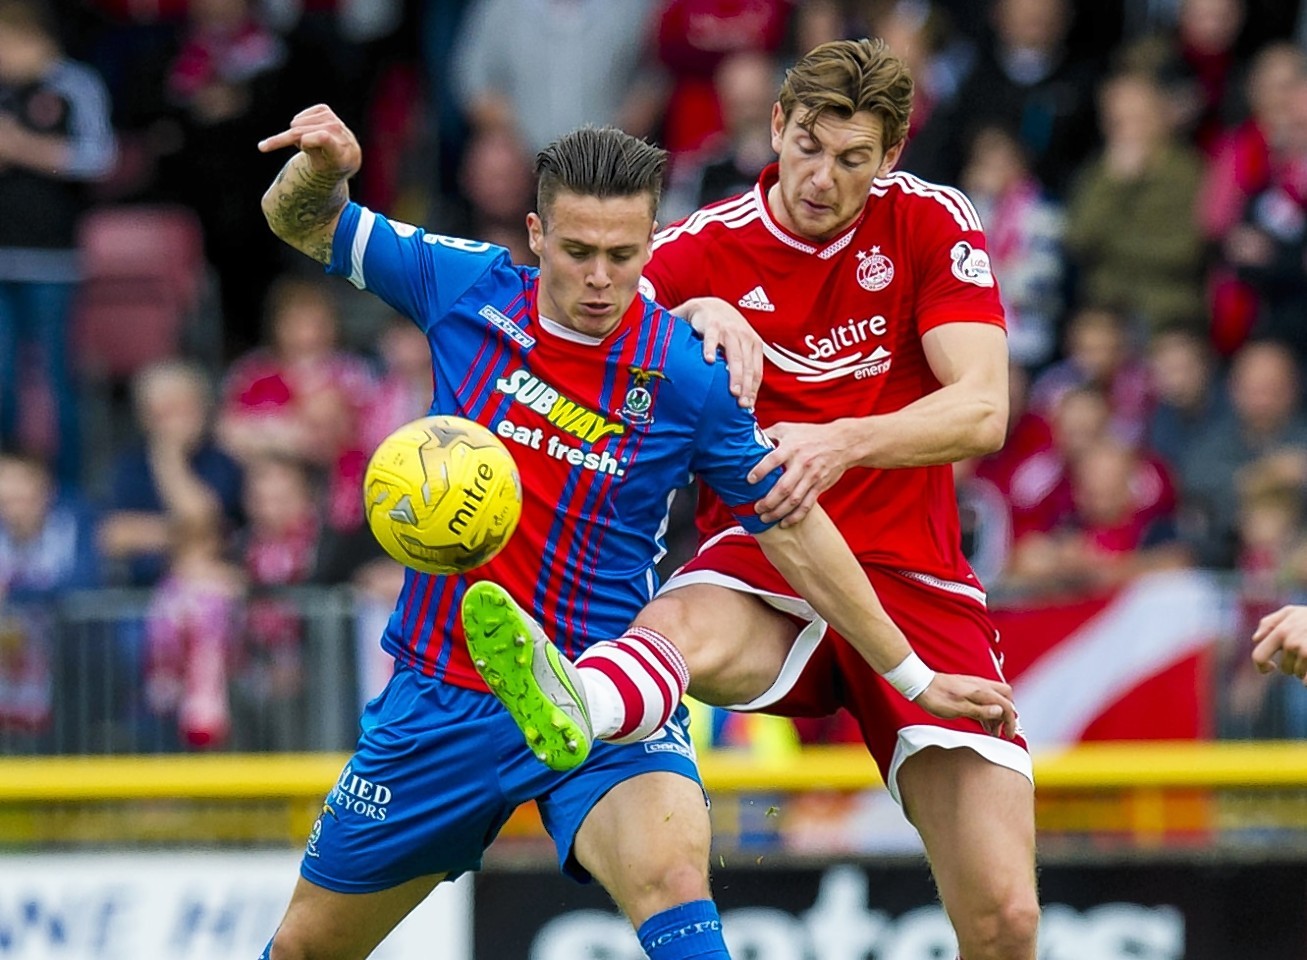 Miles Story in action for Caley Thistle 